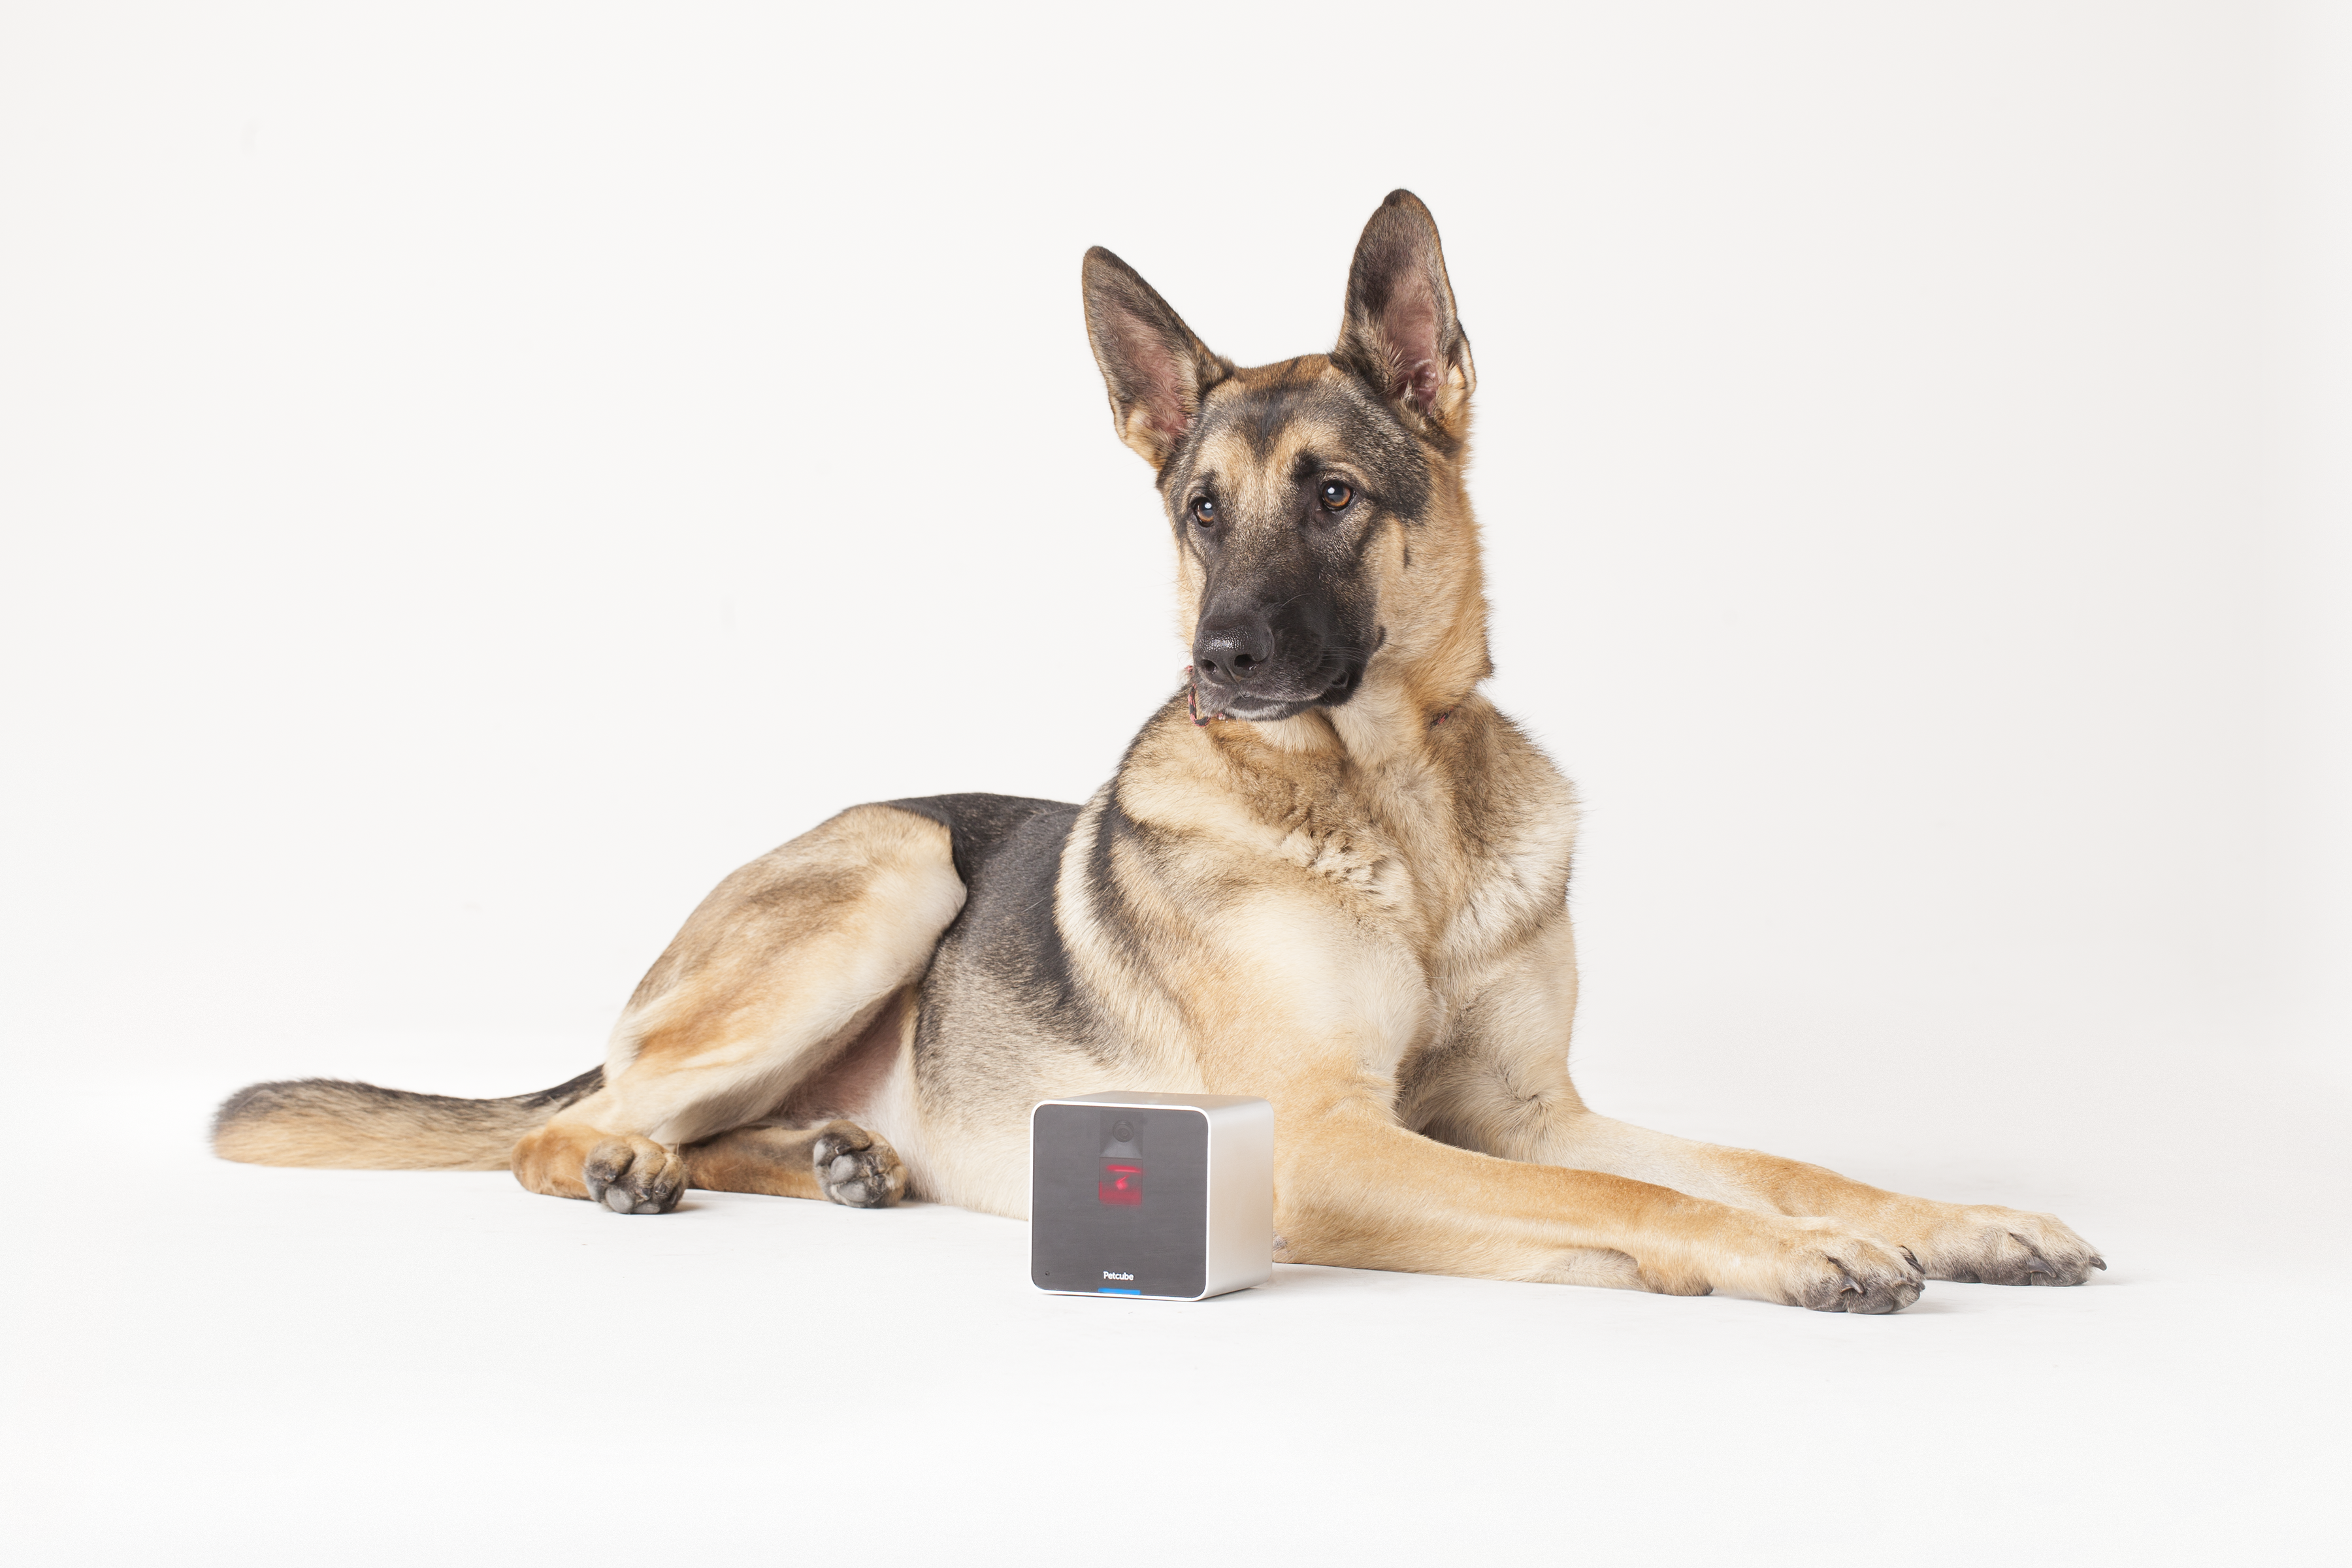 CES 2015: Spy On (And Play With) Your Pet From Afar With Petcube